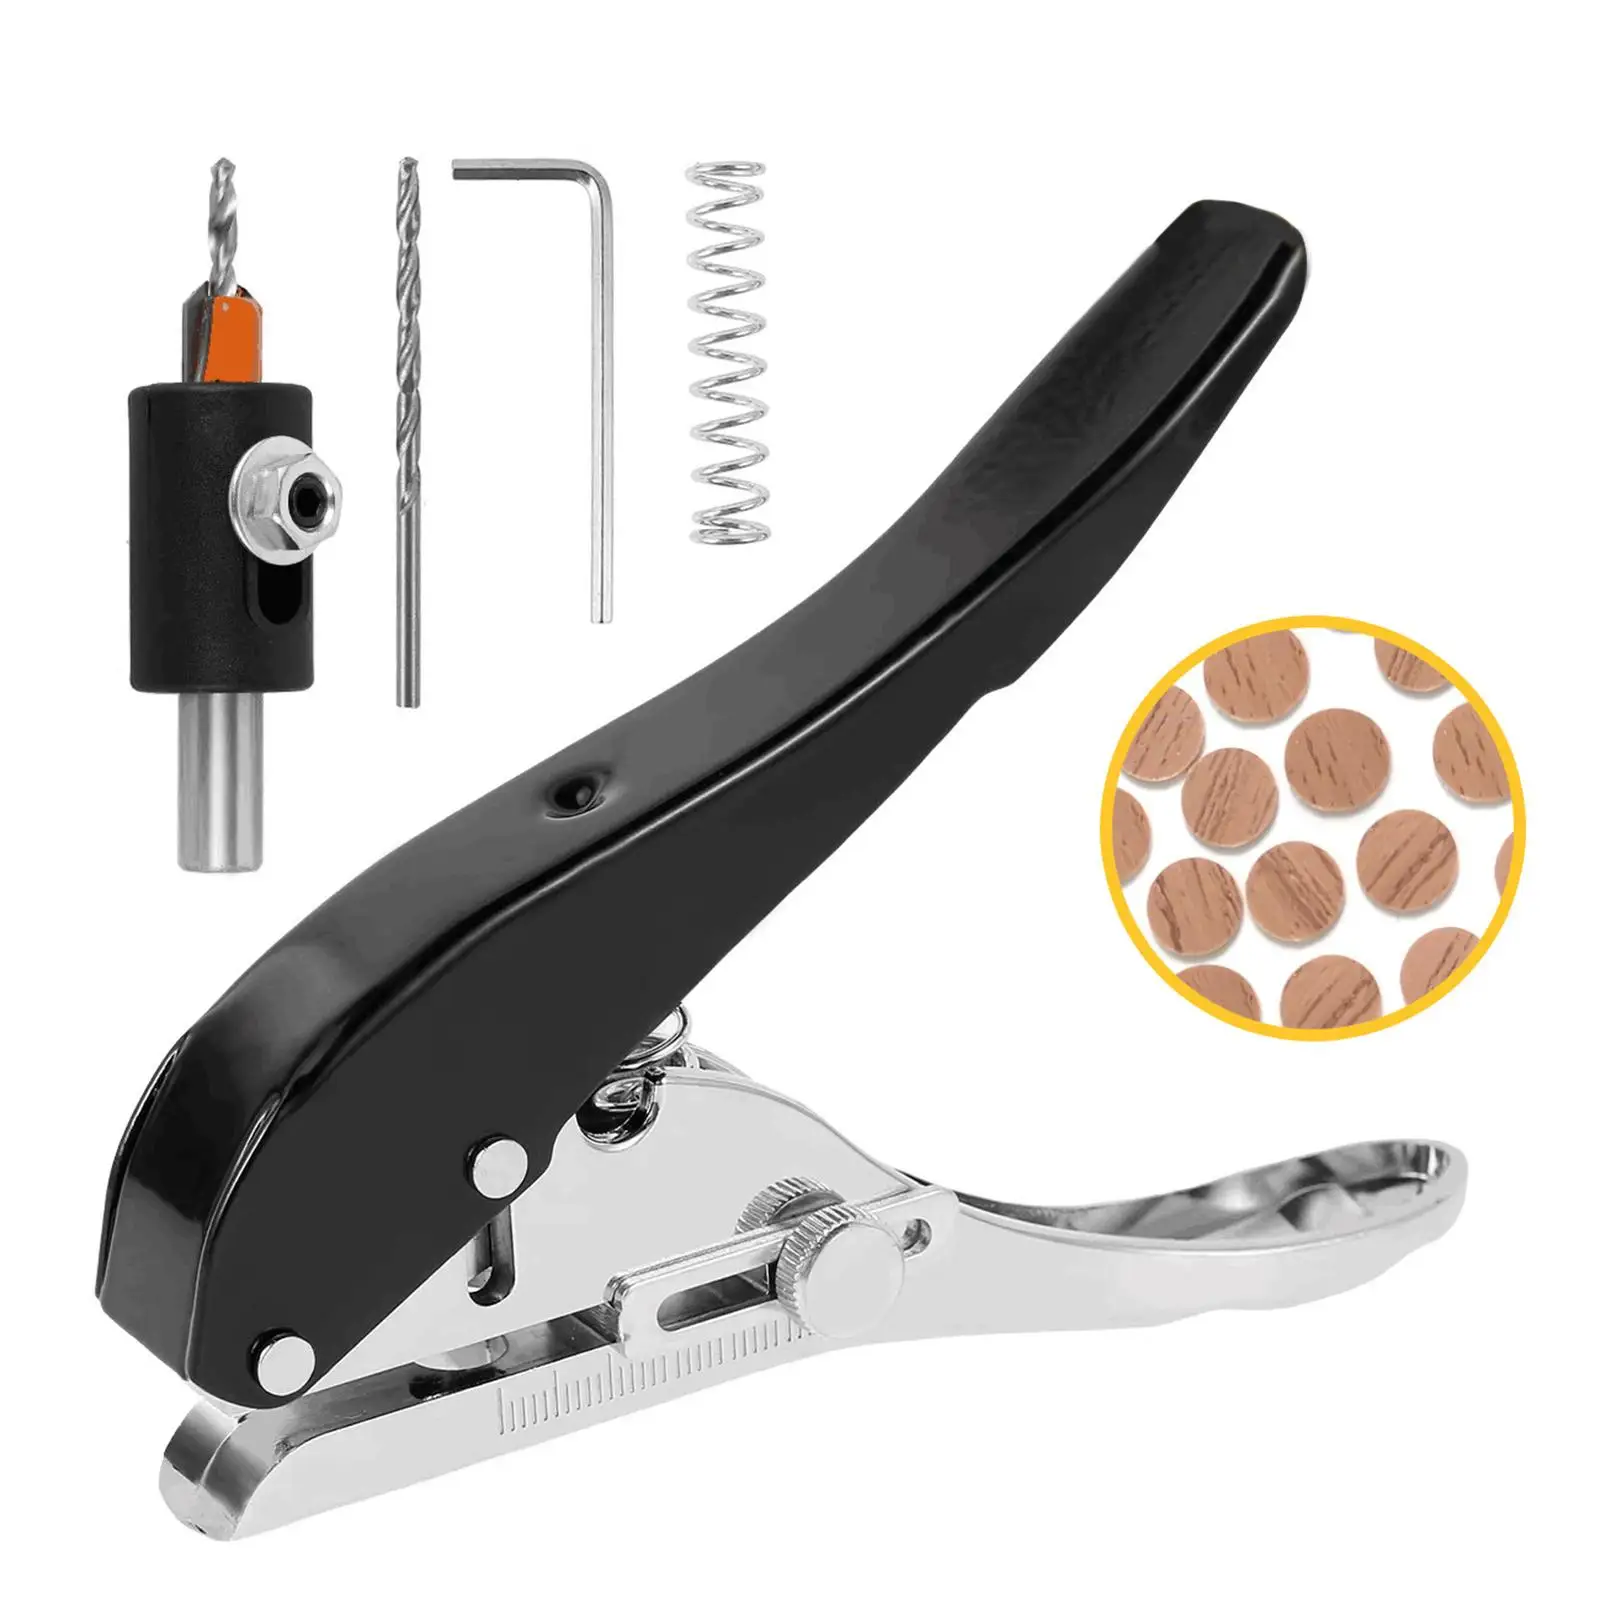 Manual Edge Band Puncher Plier Paper Punch Punching Tool Woodworking for Cards Photo